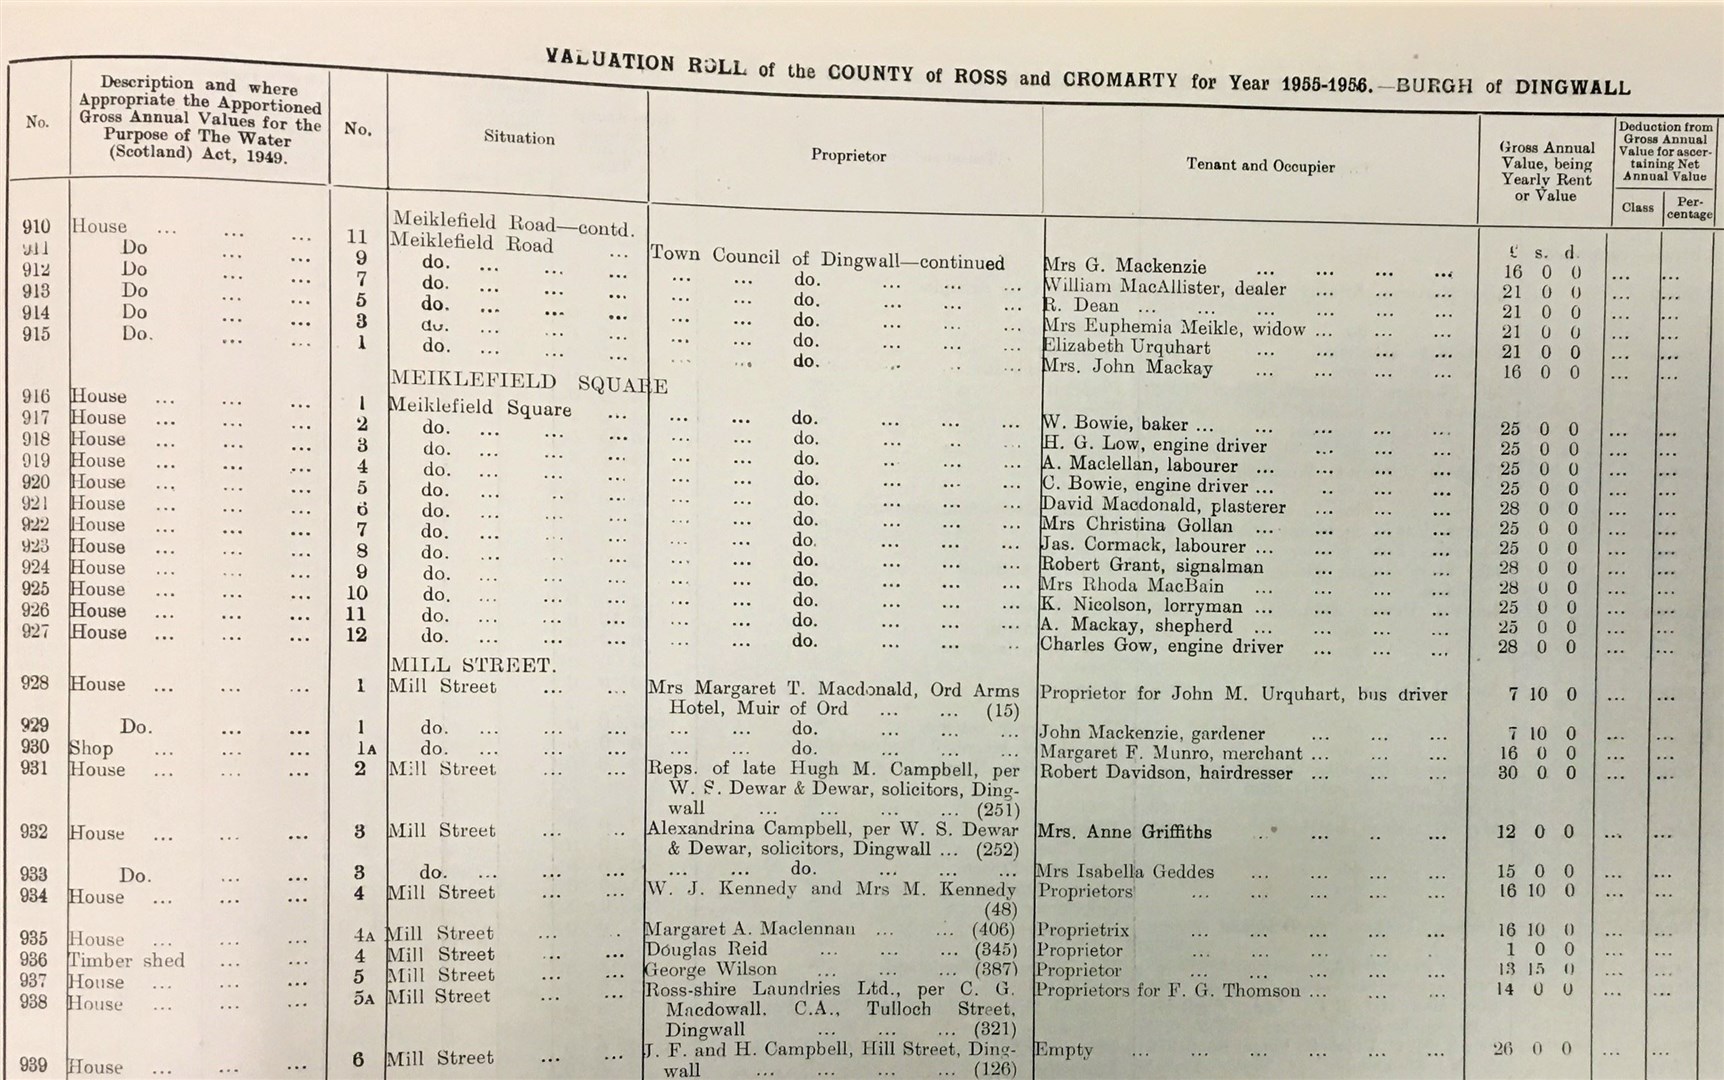 Valuation Roll showing the Burgh of Dingwall, 1955-1956